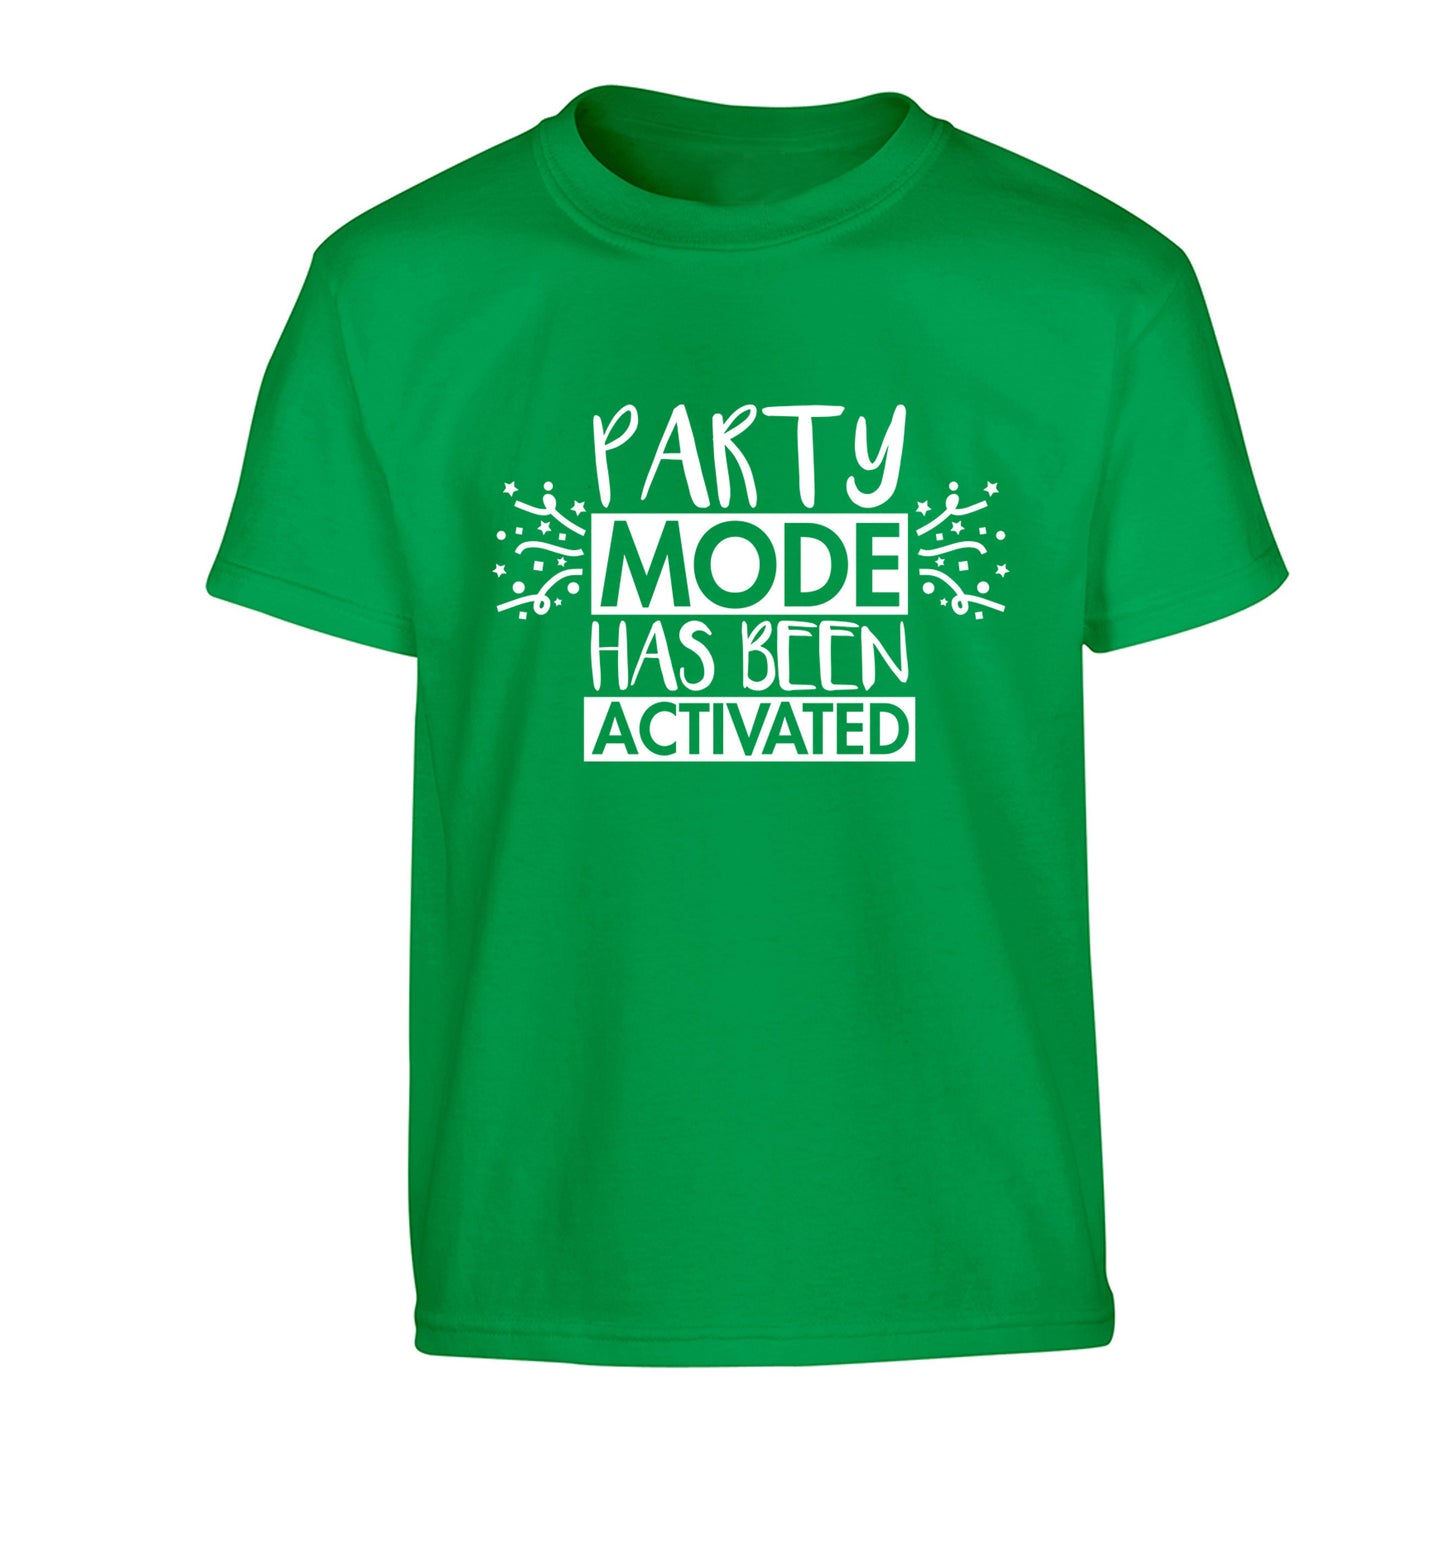 Please do not disturb party mode has been activated Children's green Tshirt 12-14 Years